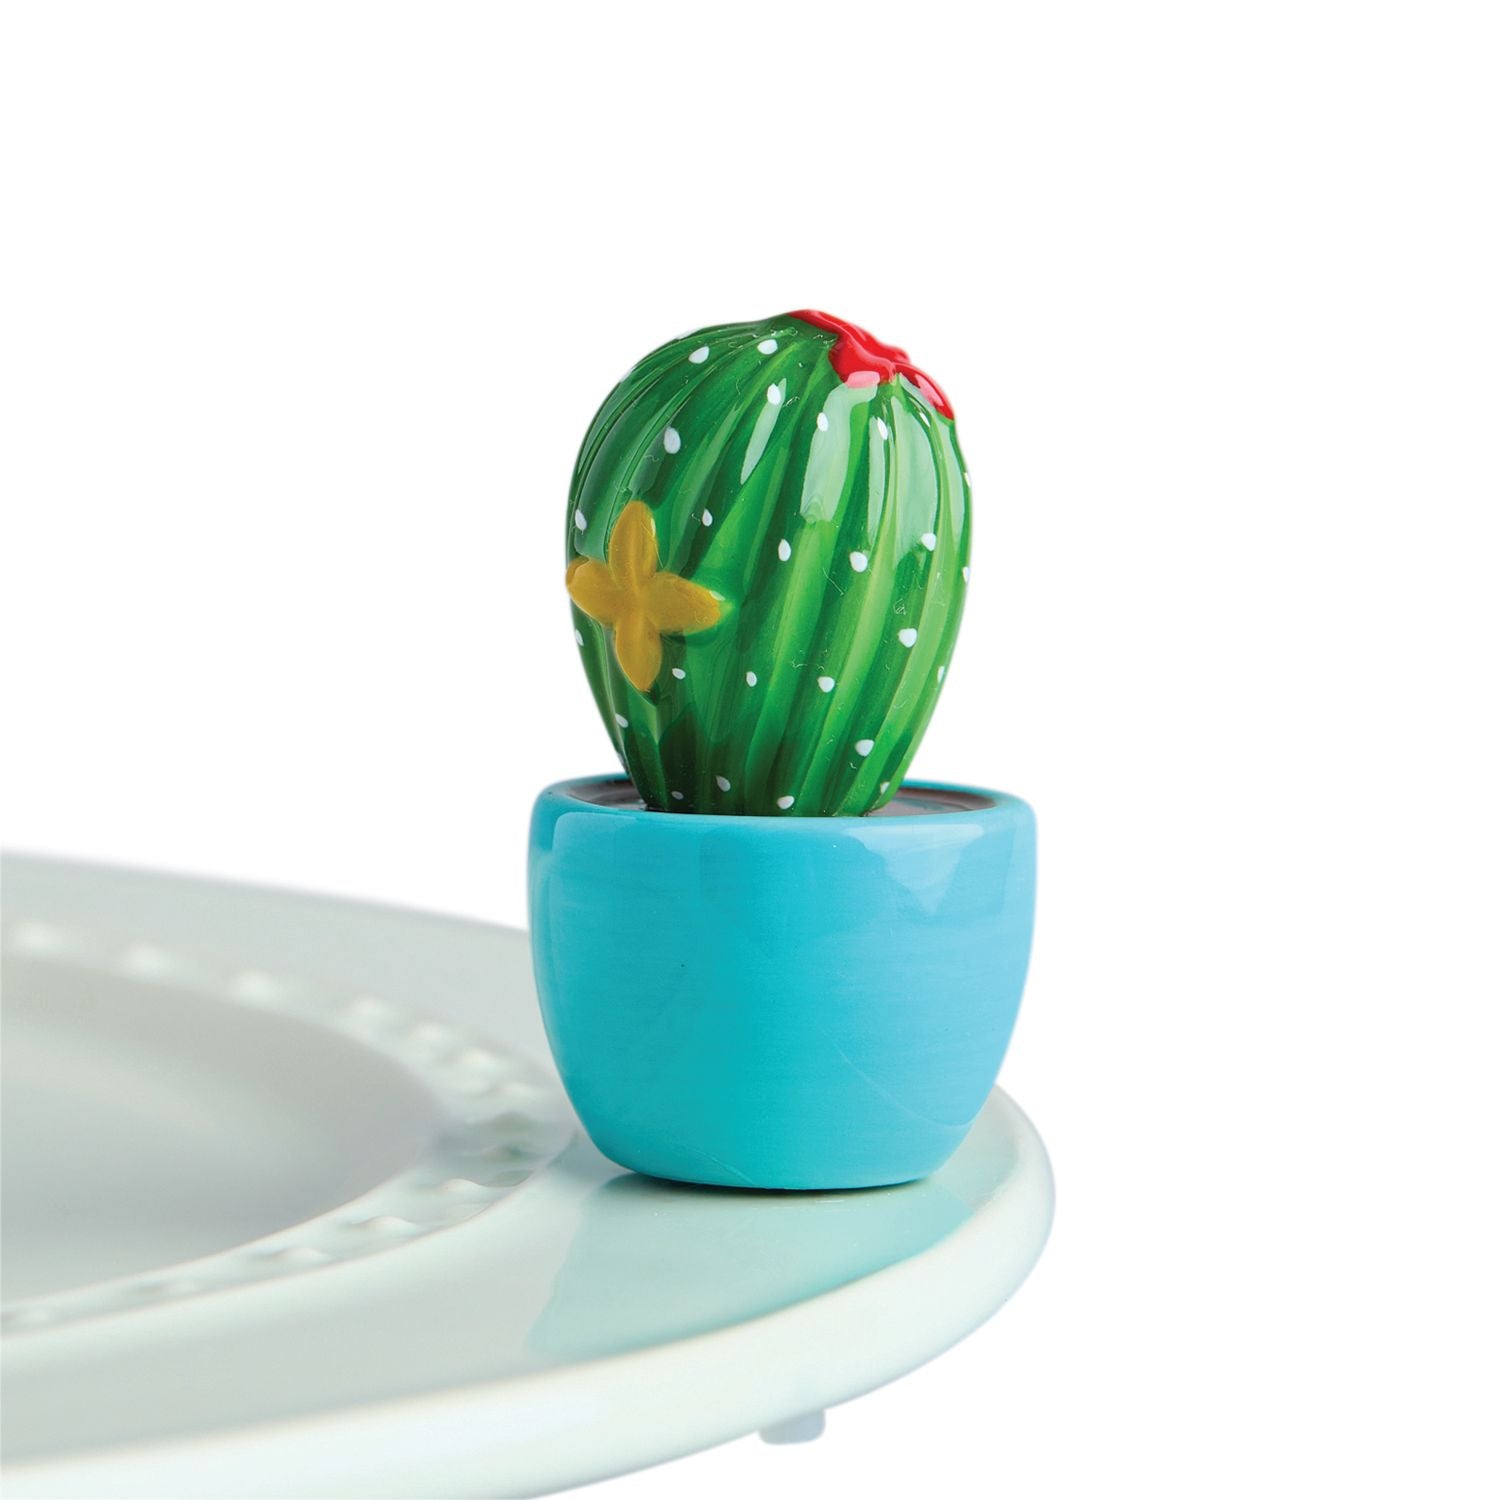 Nora Fleming "Can't Touch This" Cactus Mini A266